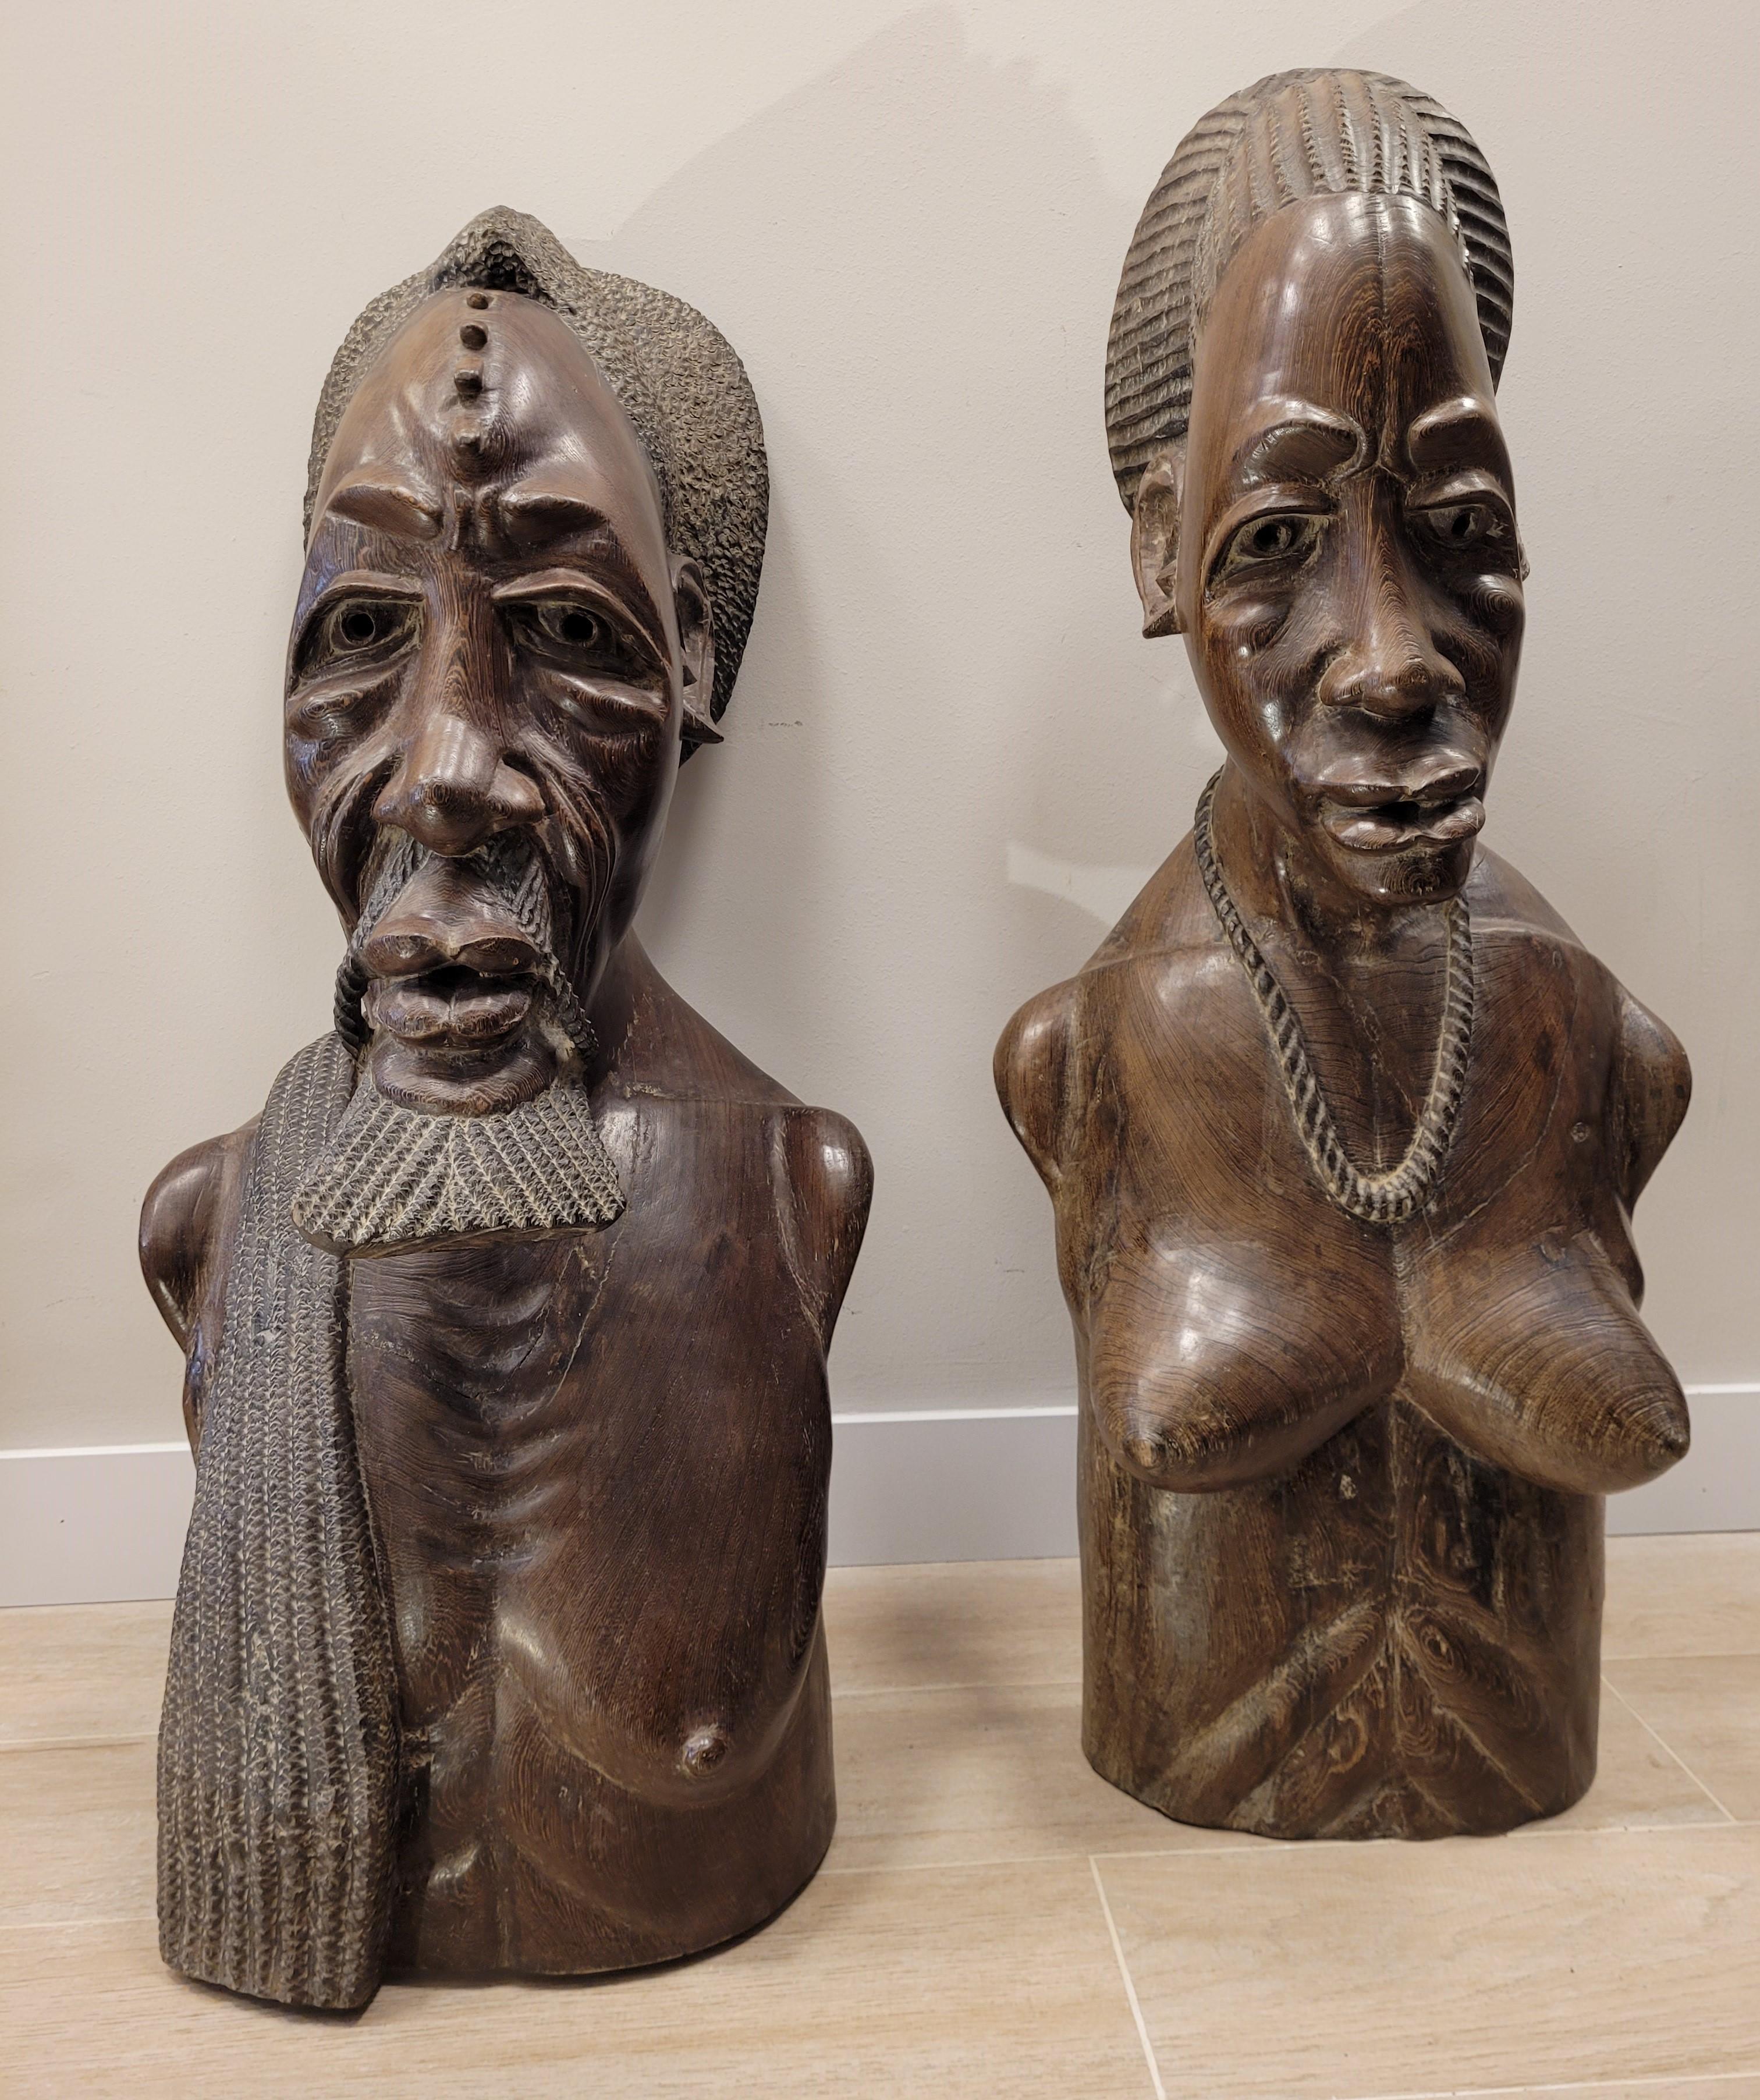 Art Deco French Wood Sculptures, Couple of Busts, Sculptures of Africans from the Congo